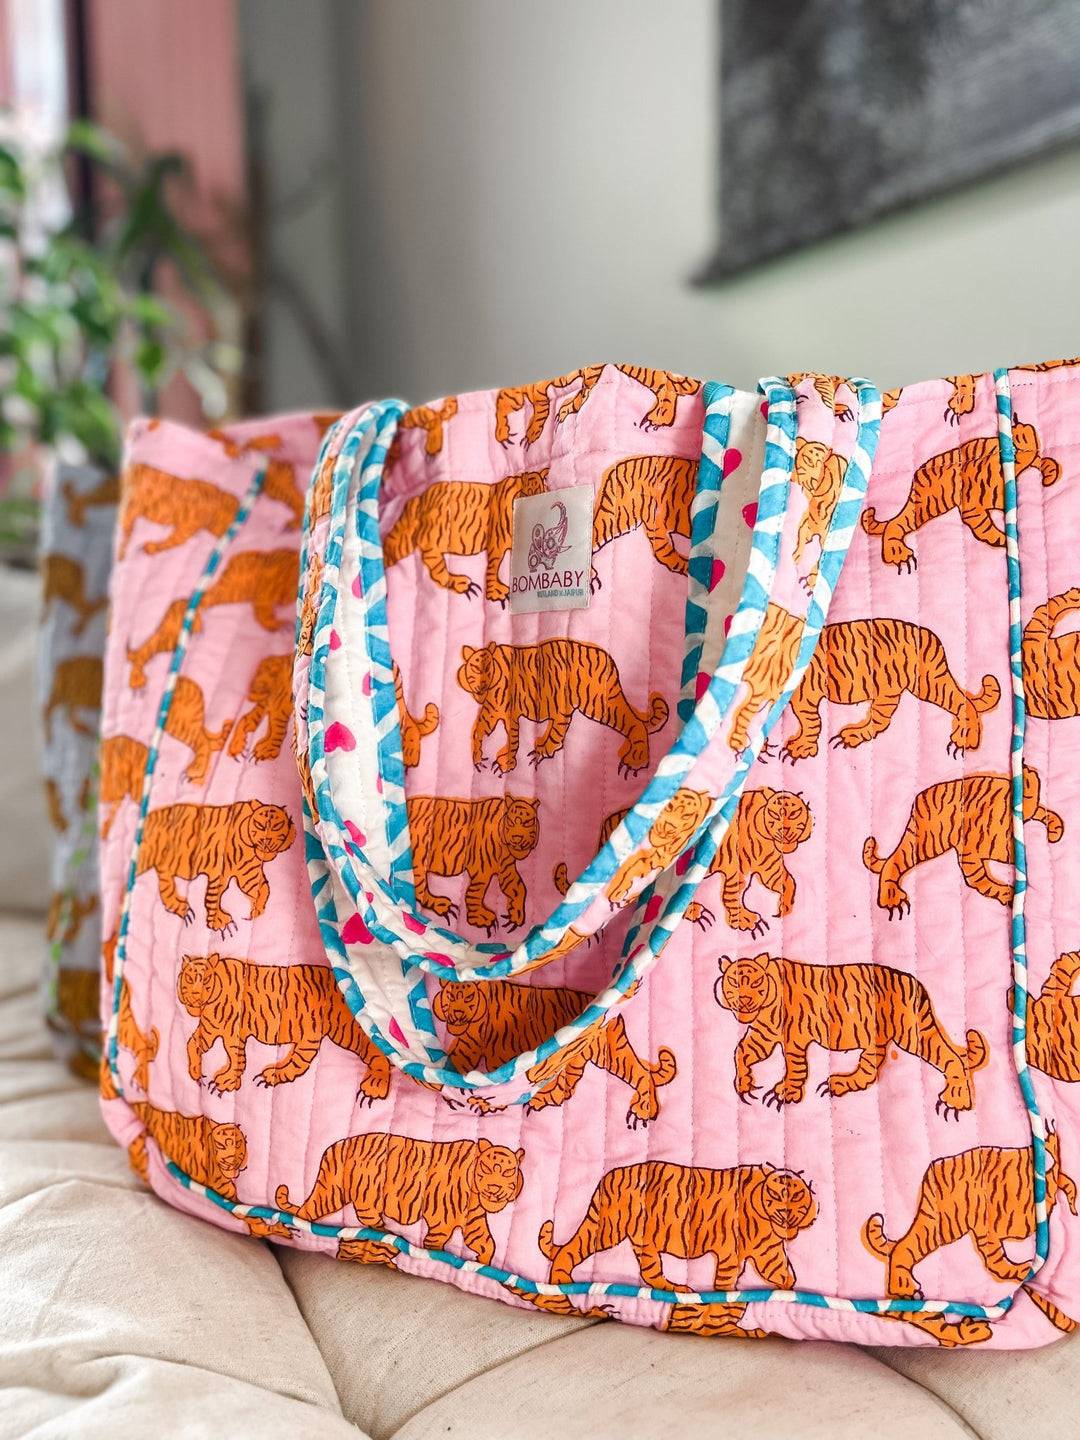 Handmade Quilted Tote Bag | Pink Tiger - Bombaby